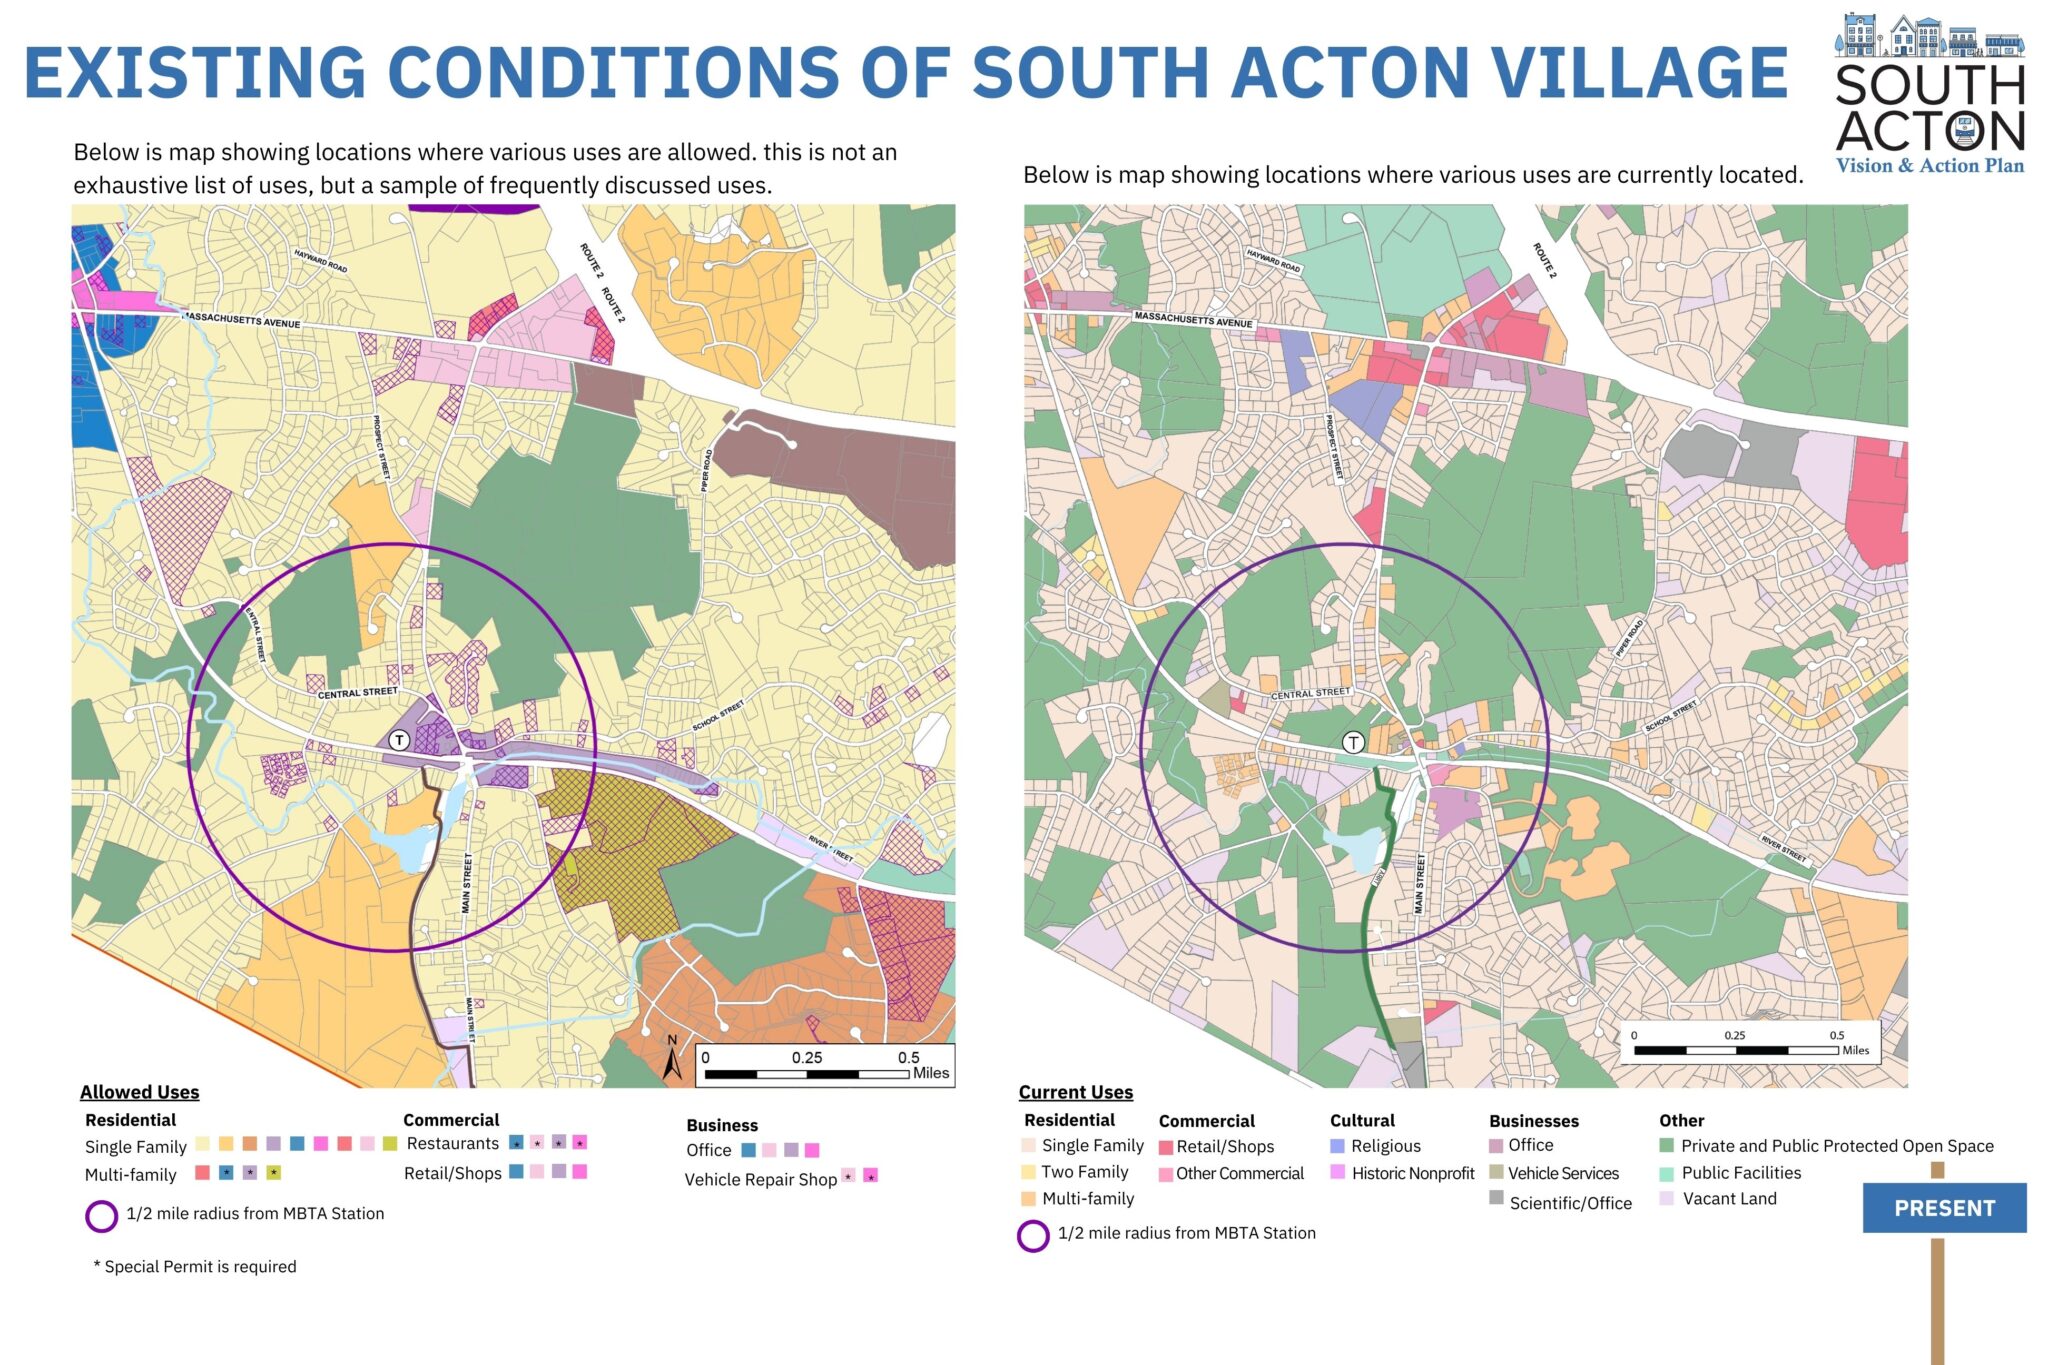 A photo showing two maps of existing use conditions in South Acton Village